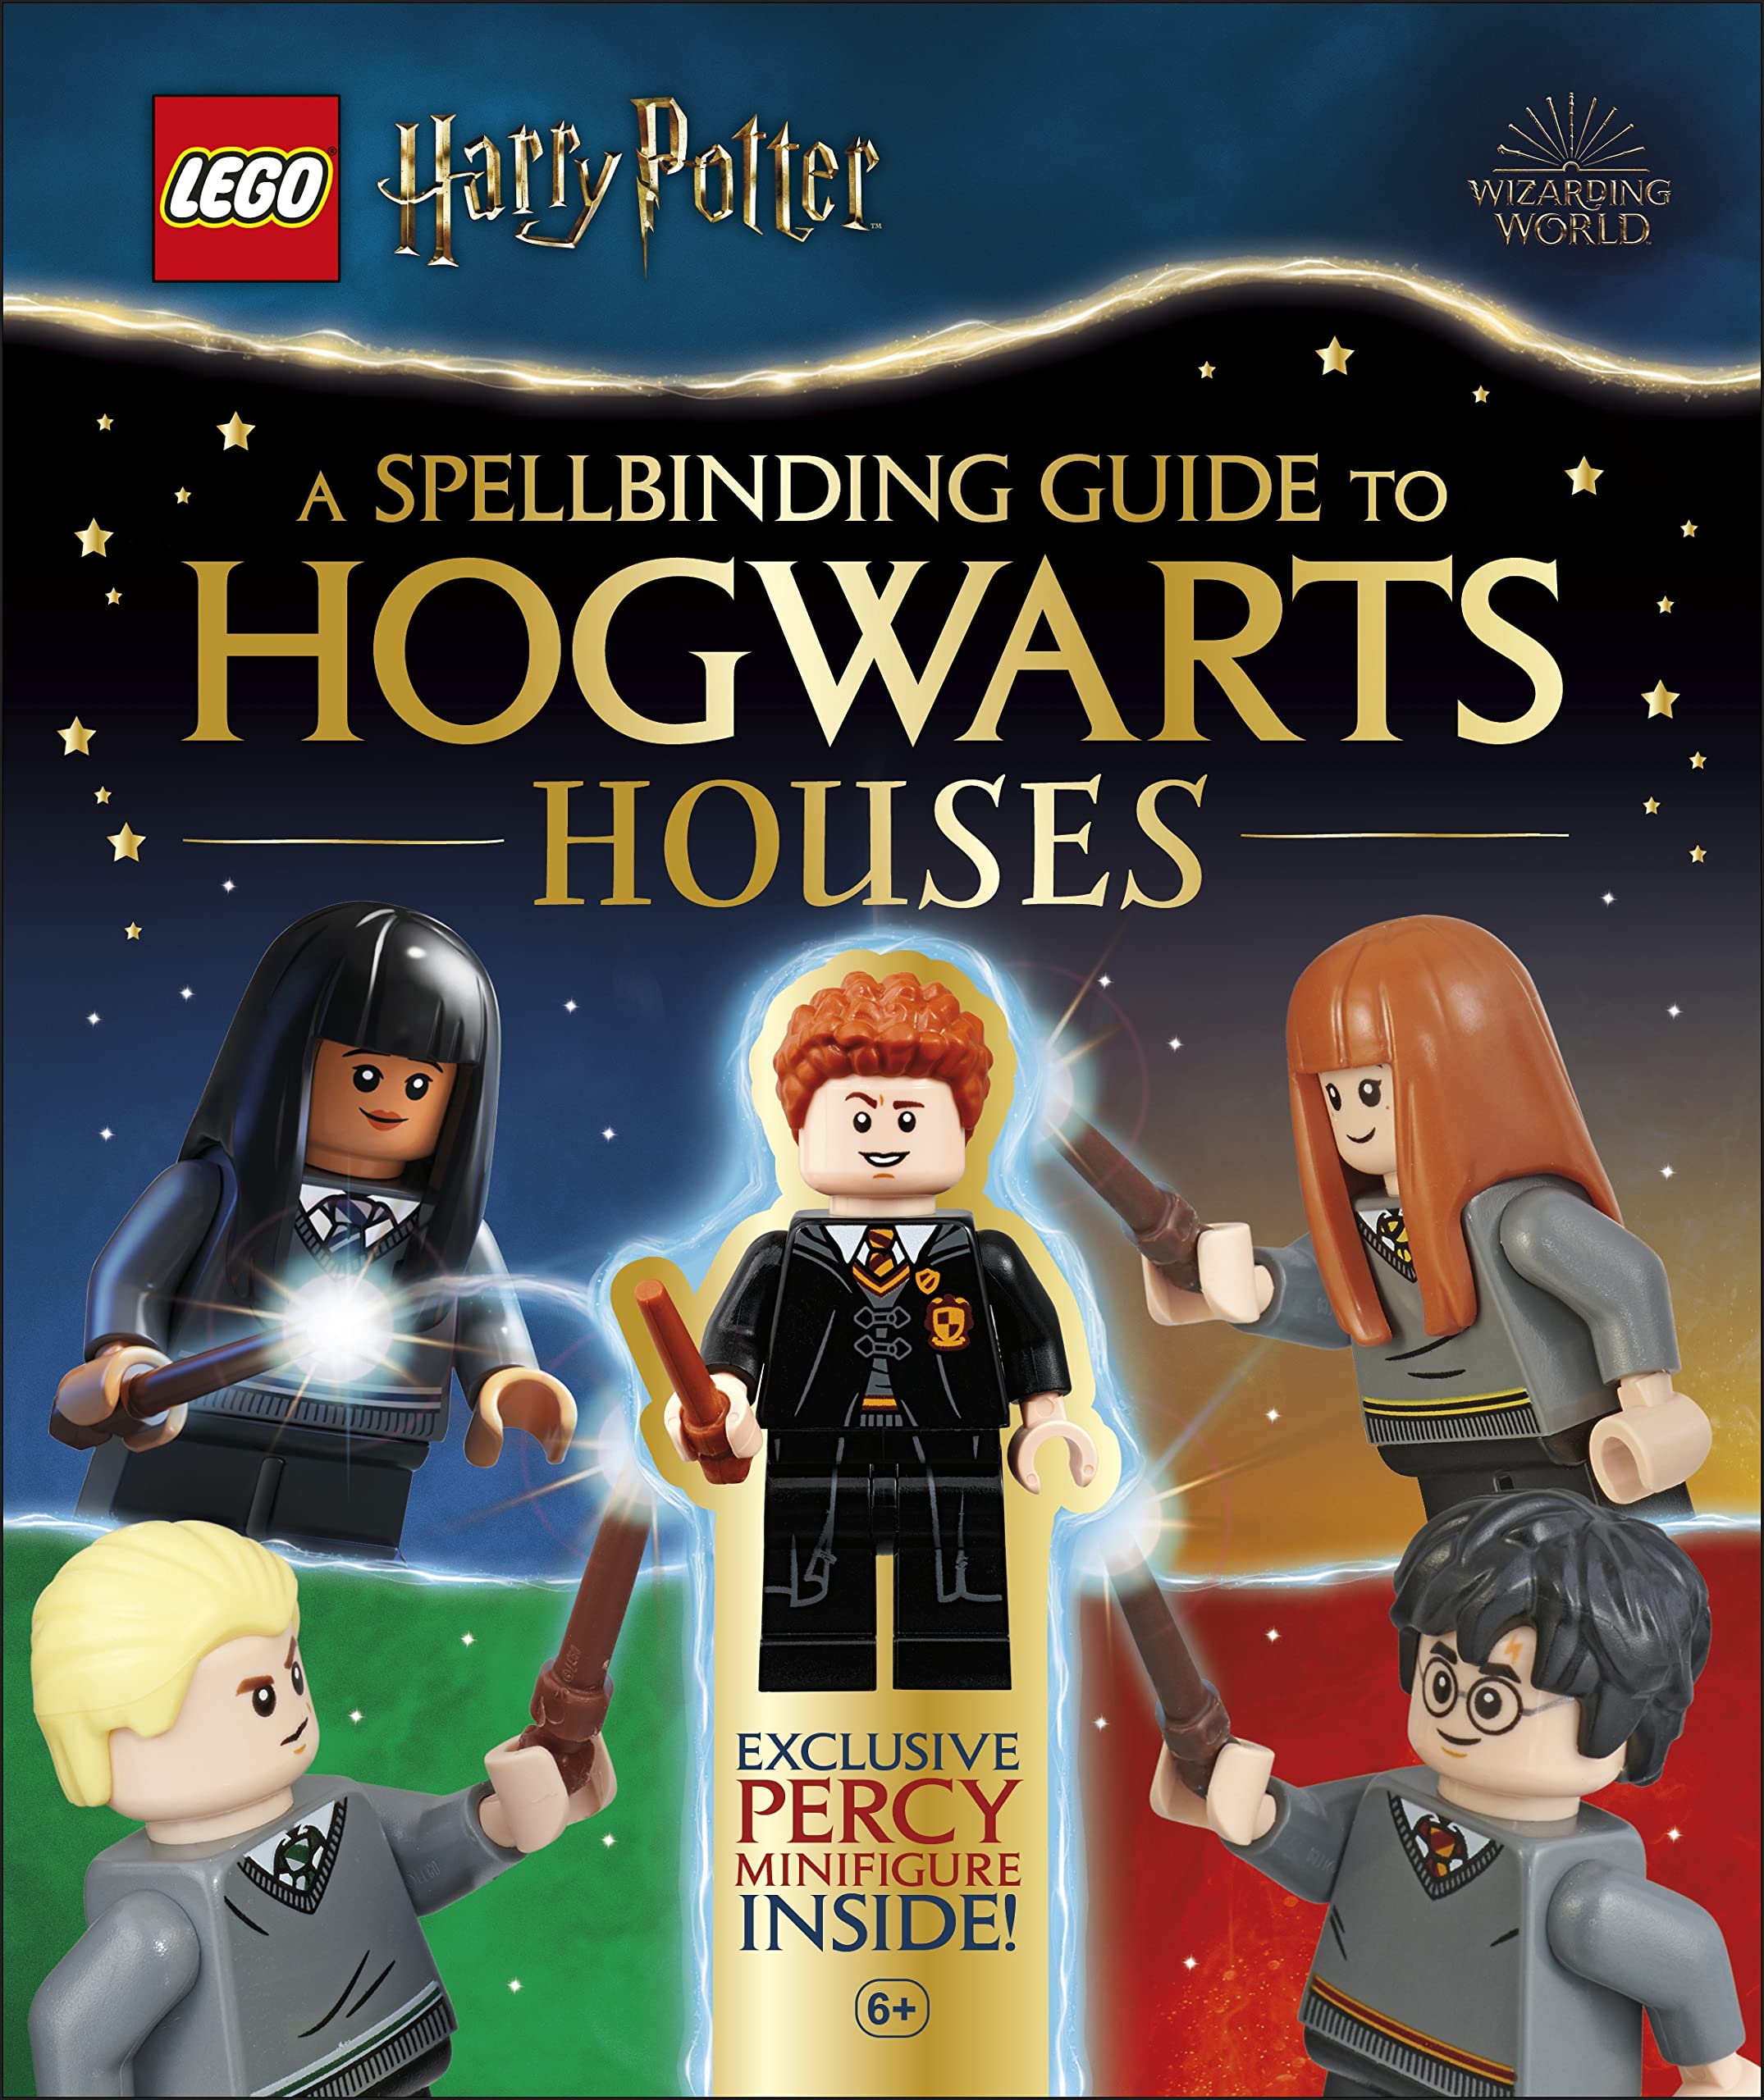 LEGO Harry Potter A Spellbinding Guide to Hogwarts Houses | Julia March